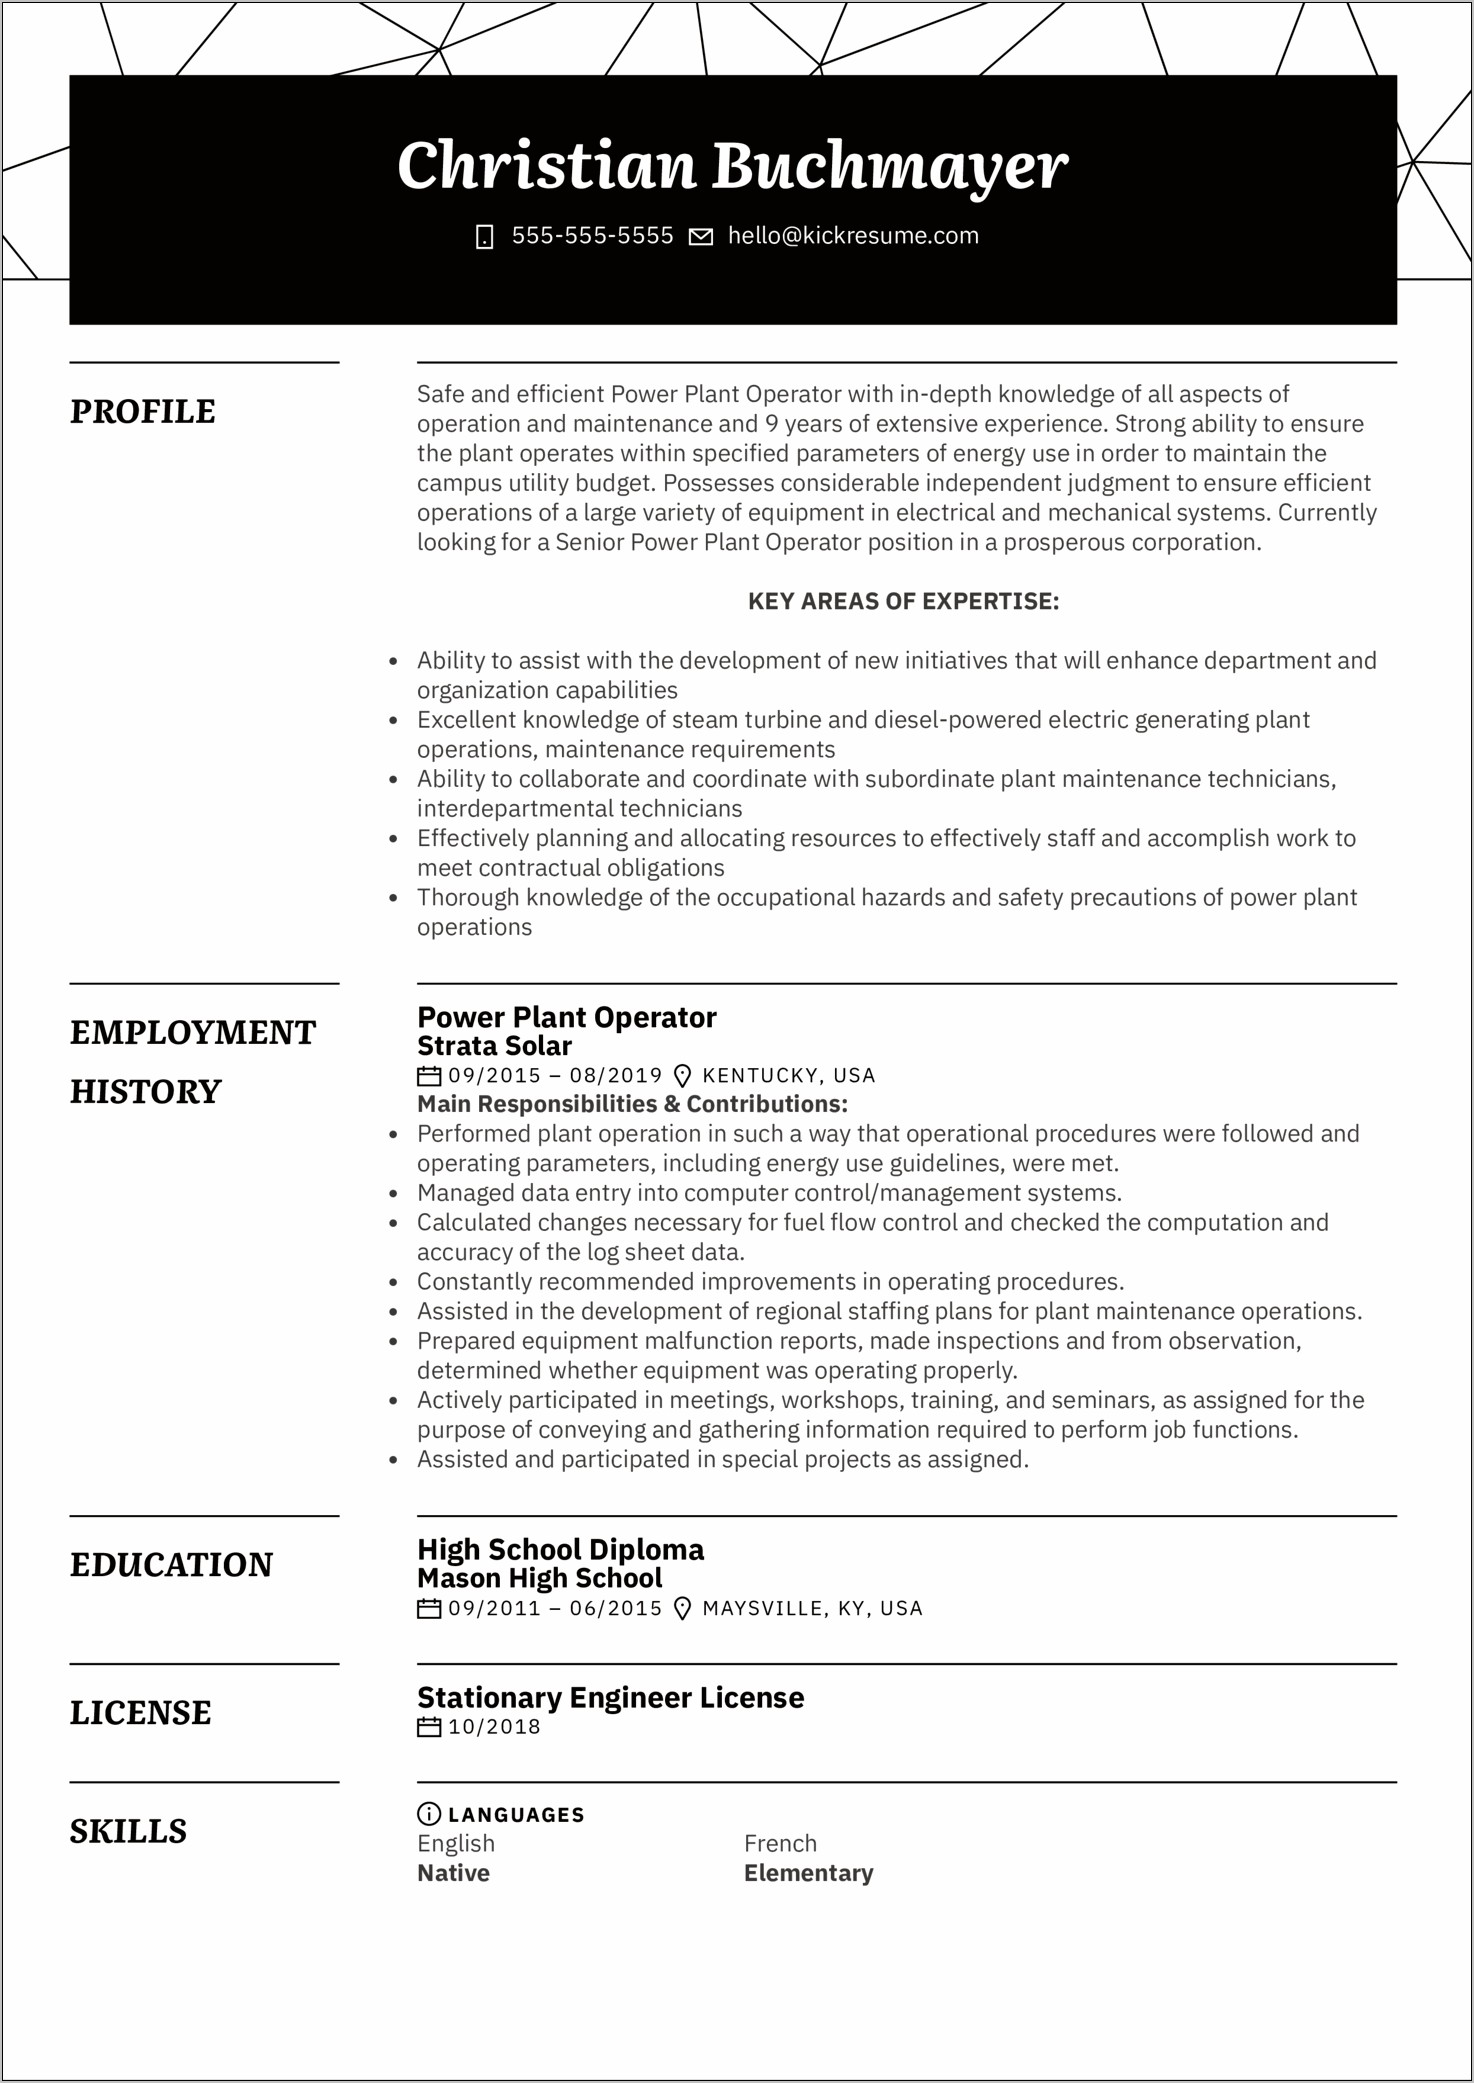 Example Of High School Diploma Resume